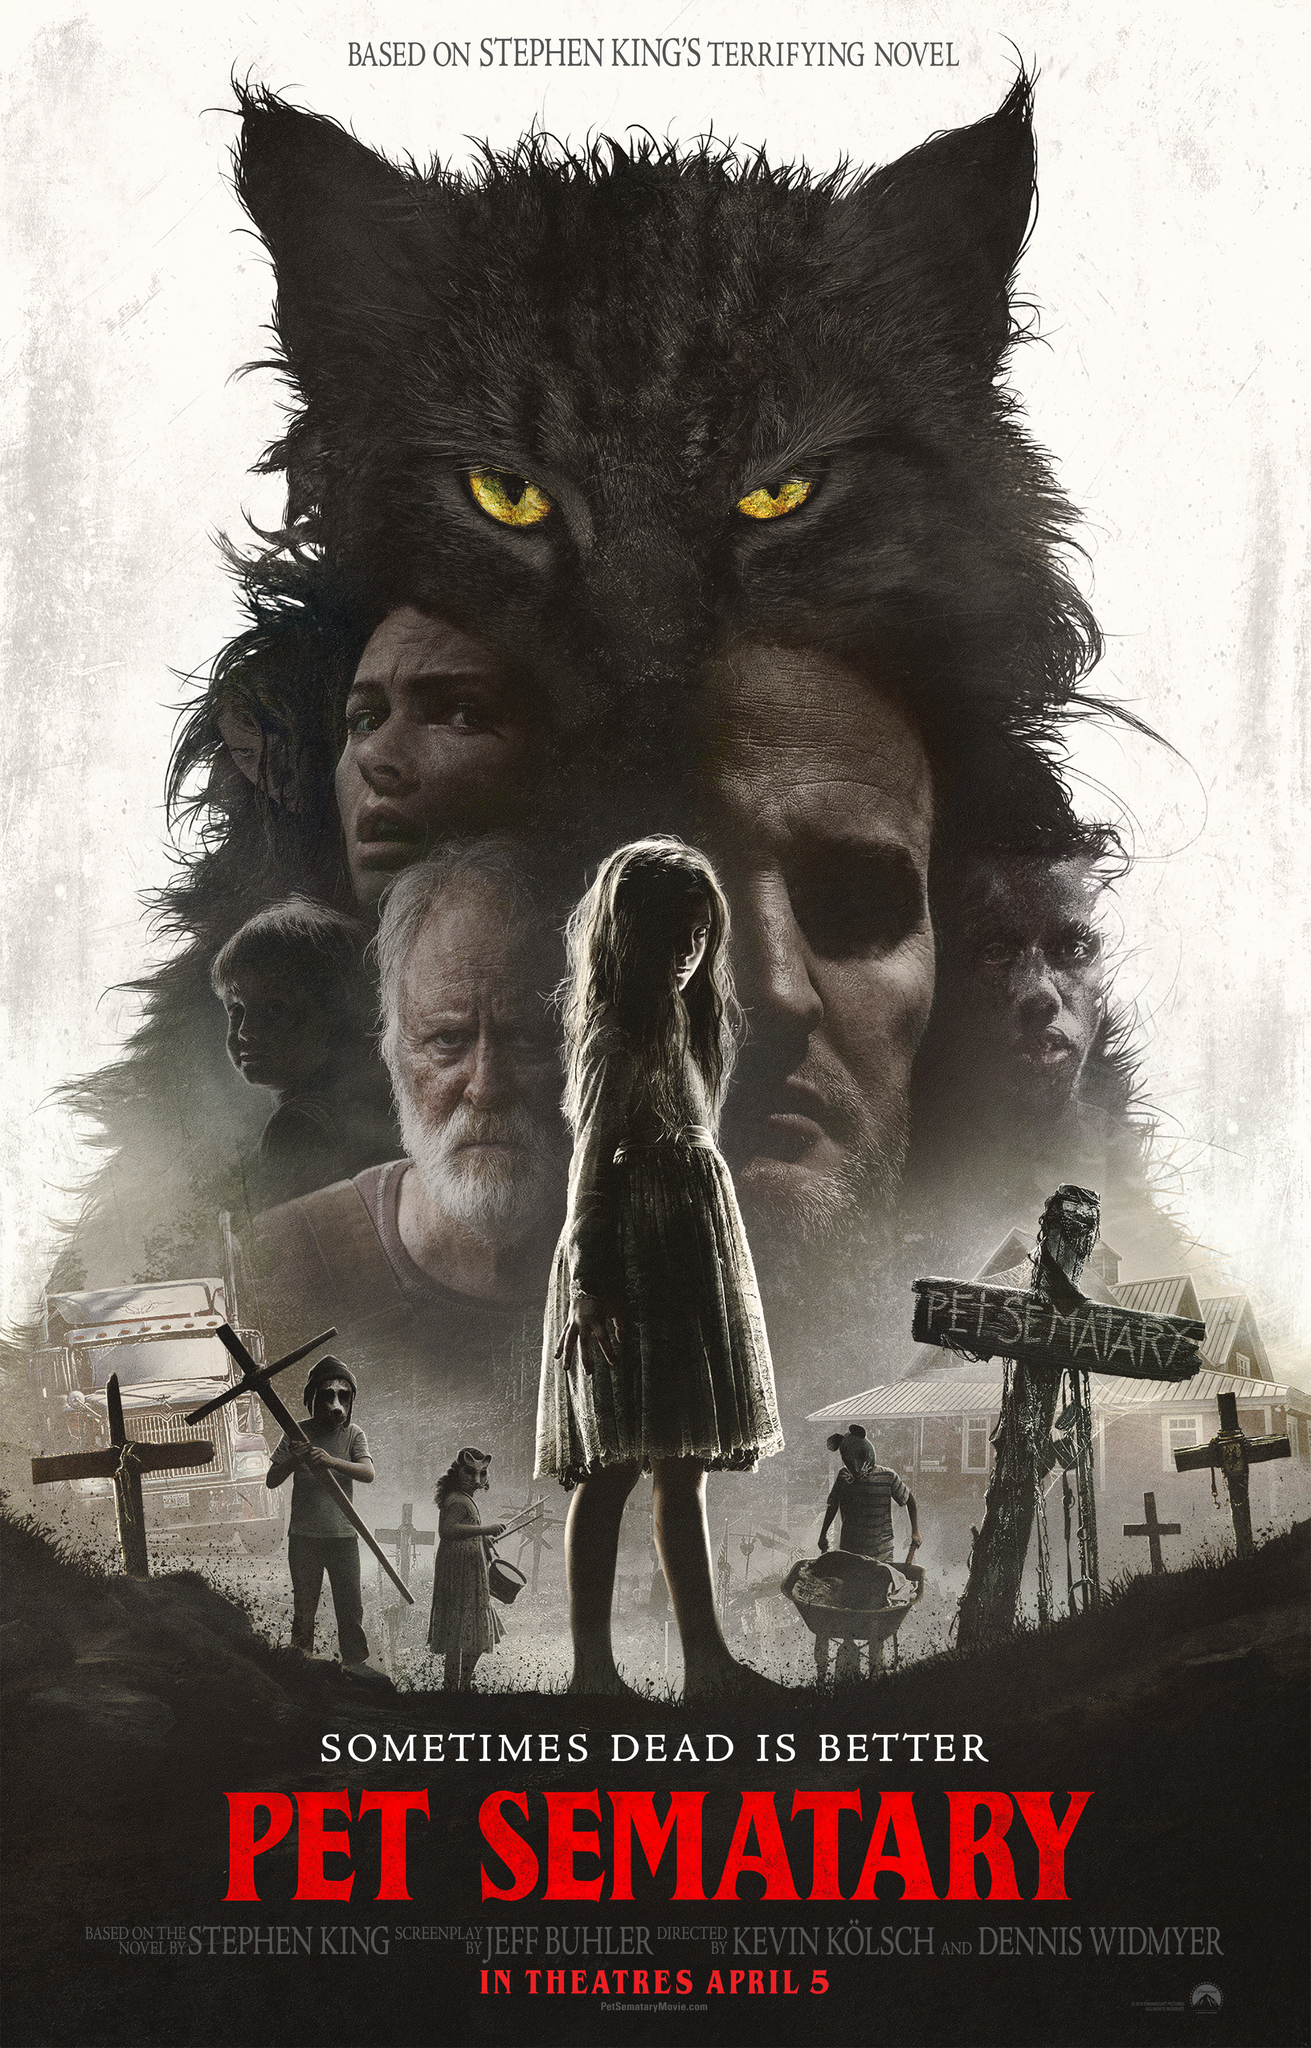 Pet Sematary – The Stephen King Story Gets a New Adaptation… But Did We Need It?